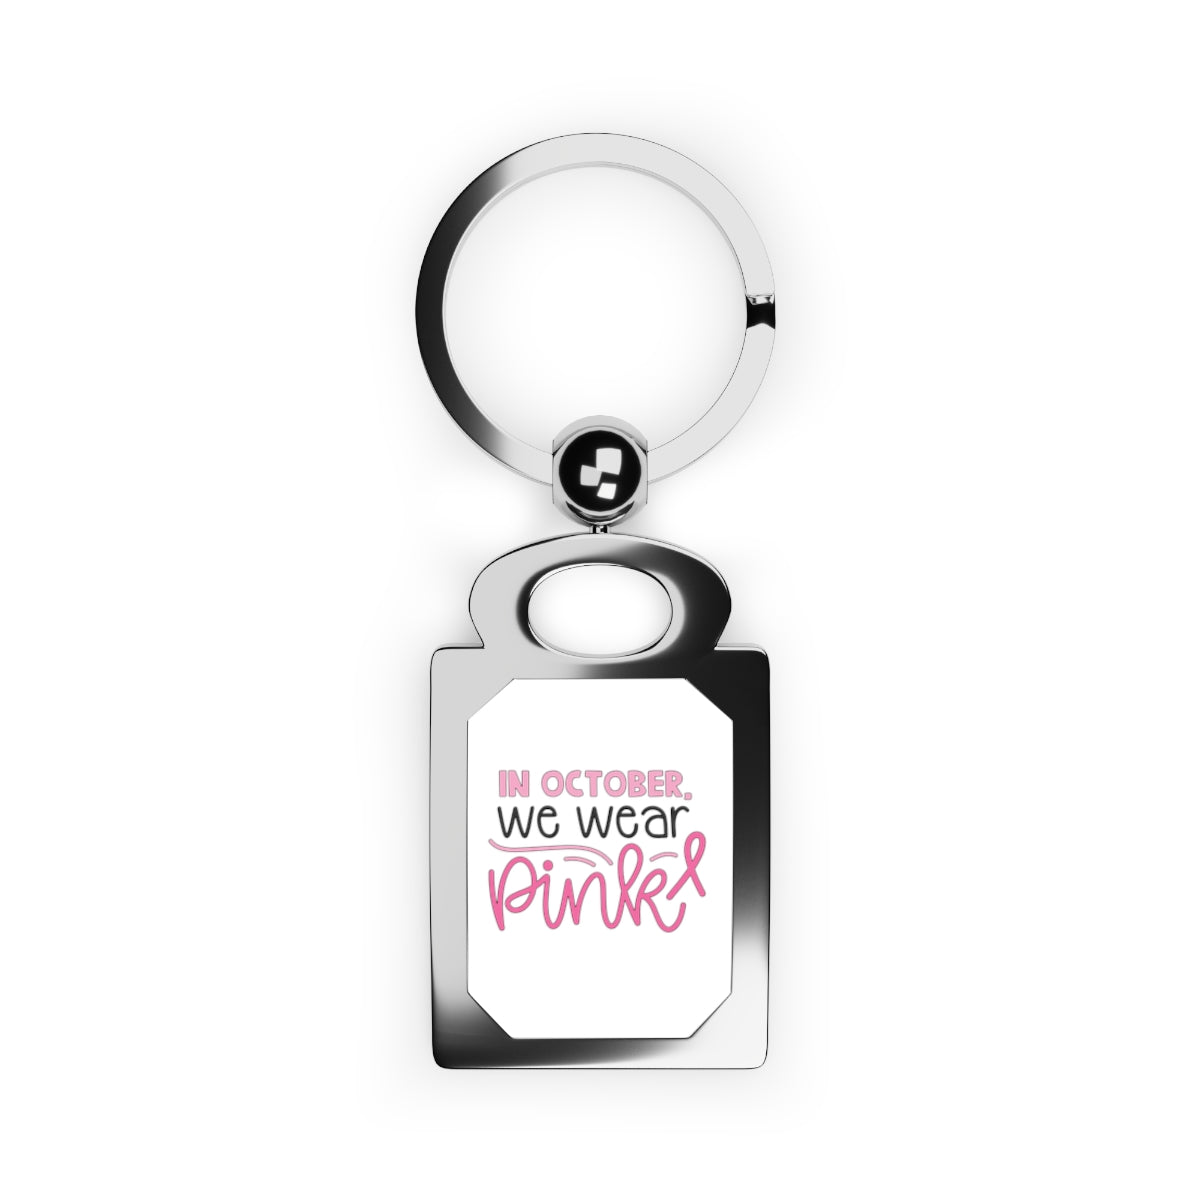 In October We Wear Pink Rectangle Photo Keyring